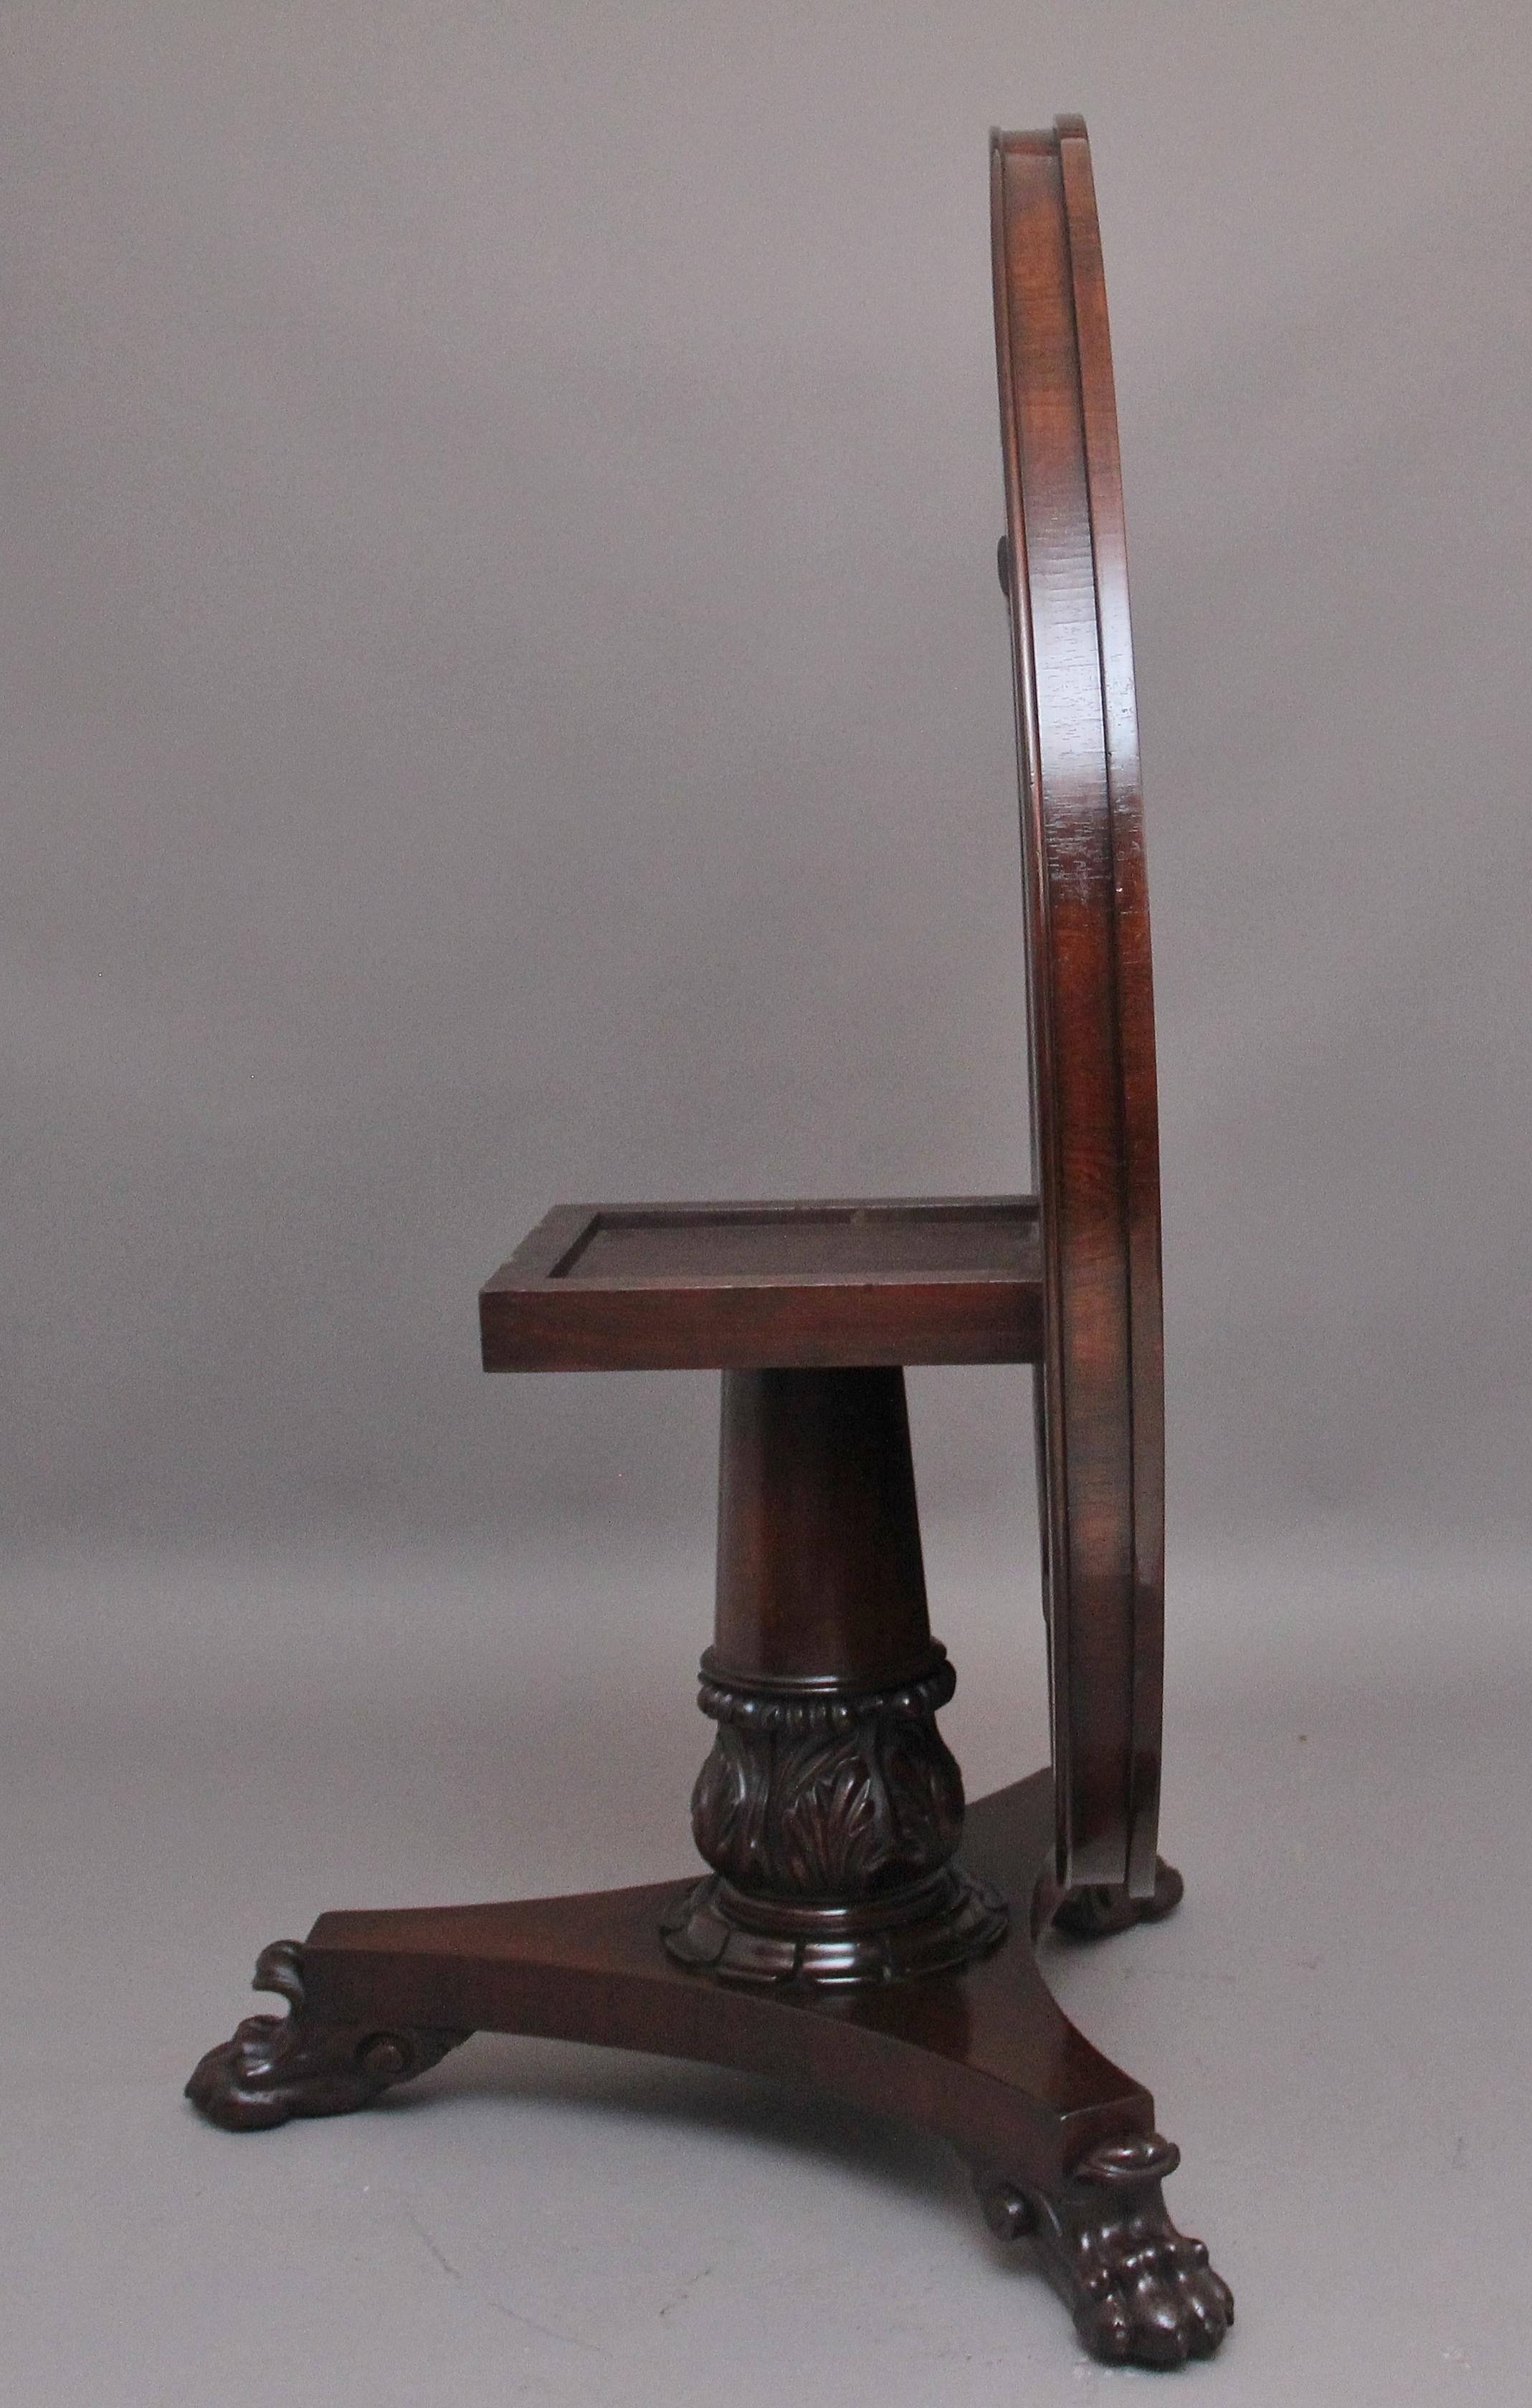 19th Century rosewood tilt top breakfast / centre table, with a beautifully figured top with frieze below, supported on a turned column with lovely crisp carved tulip decoration at the bottom, resting on a tri platform base terminating on carved